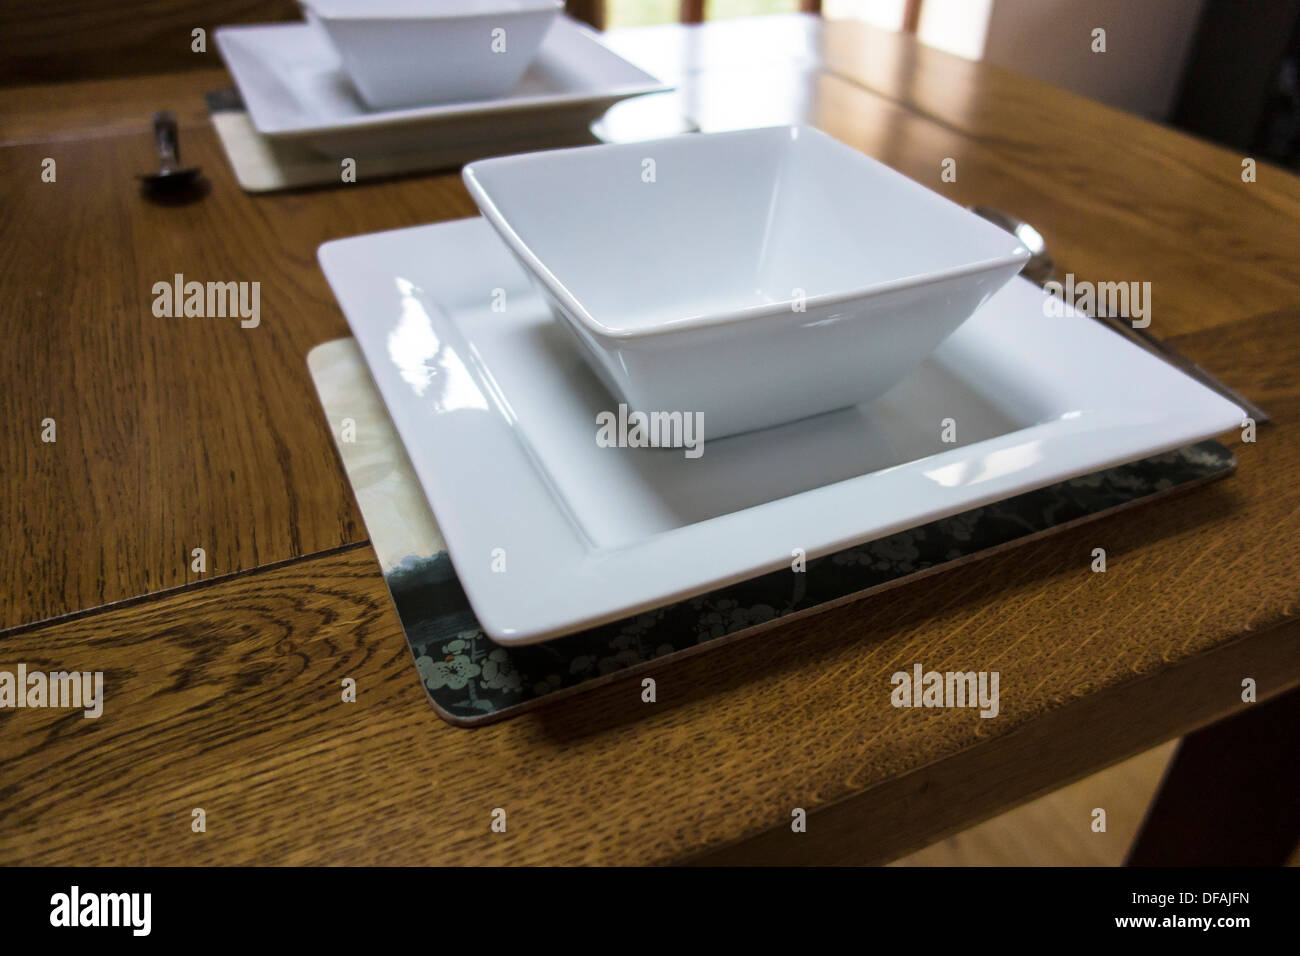 Place setting for two people.Square white bowls and plates. Stock Photo